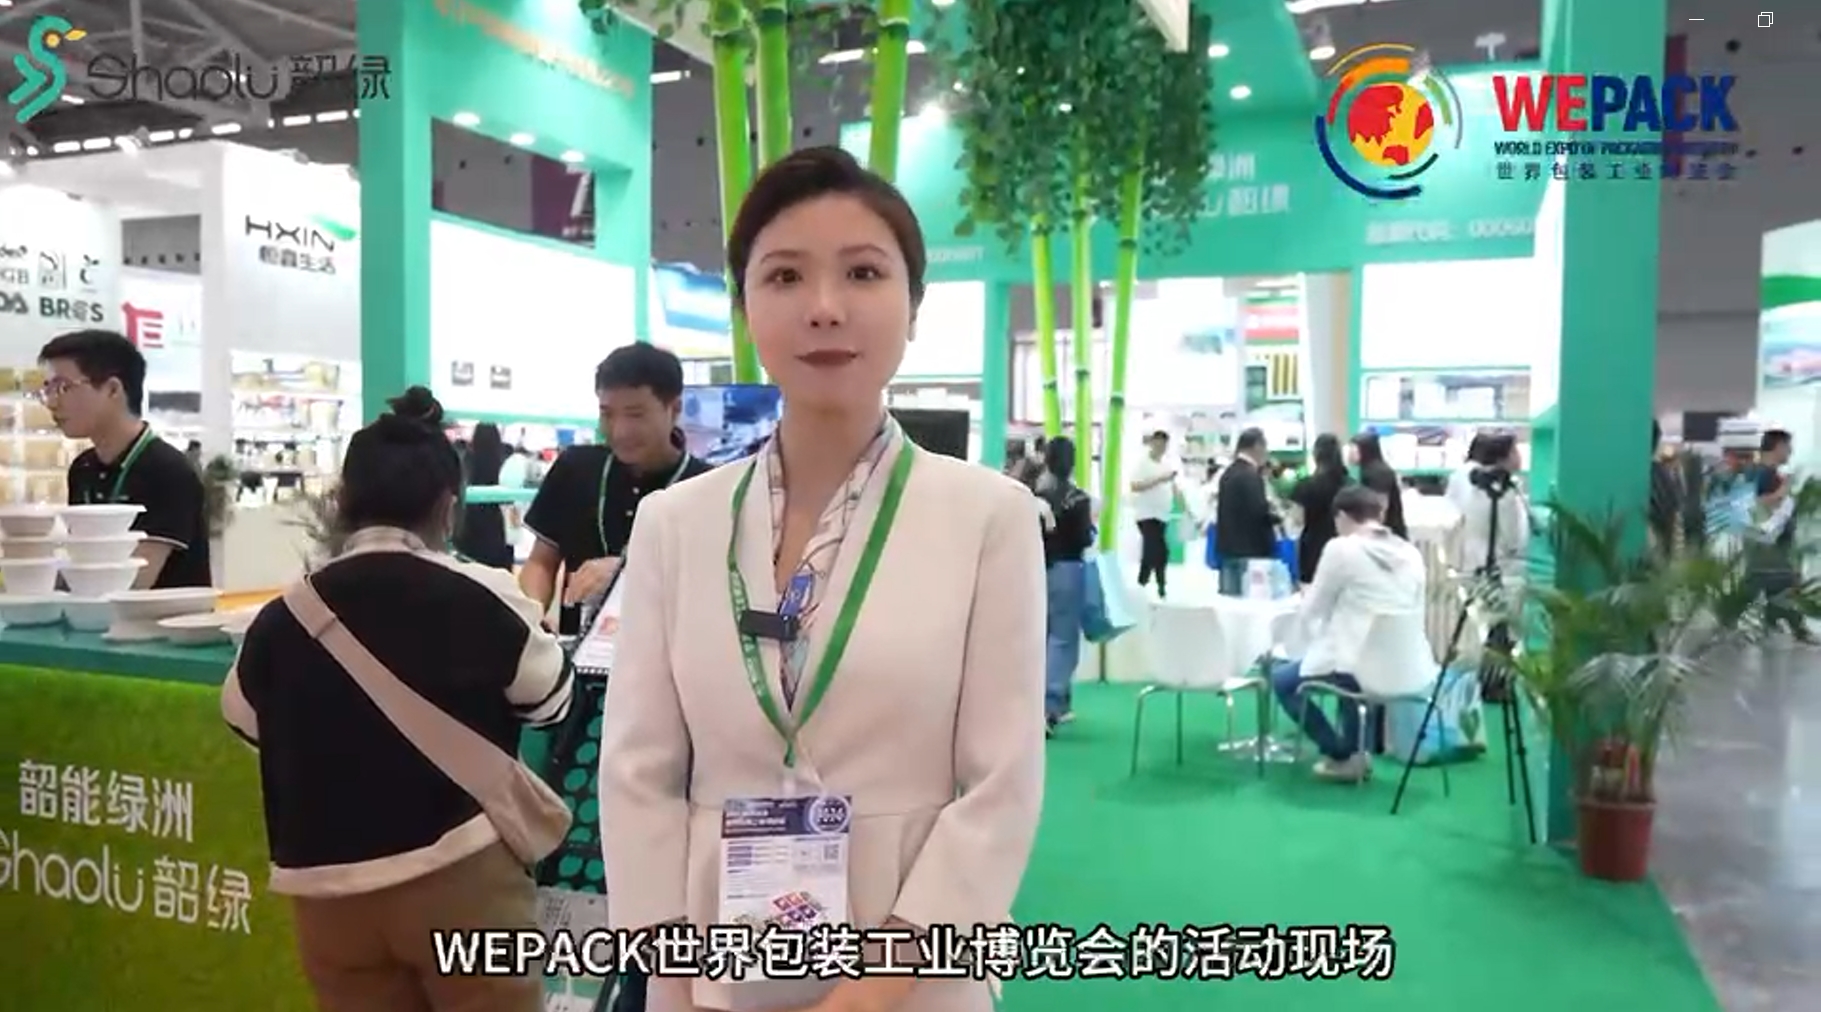 Luzhou Pack at PACKCON from a Media Perspective